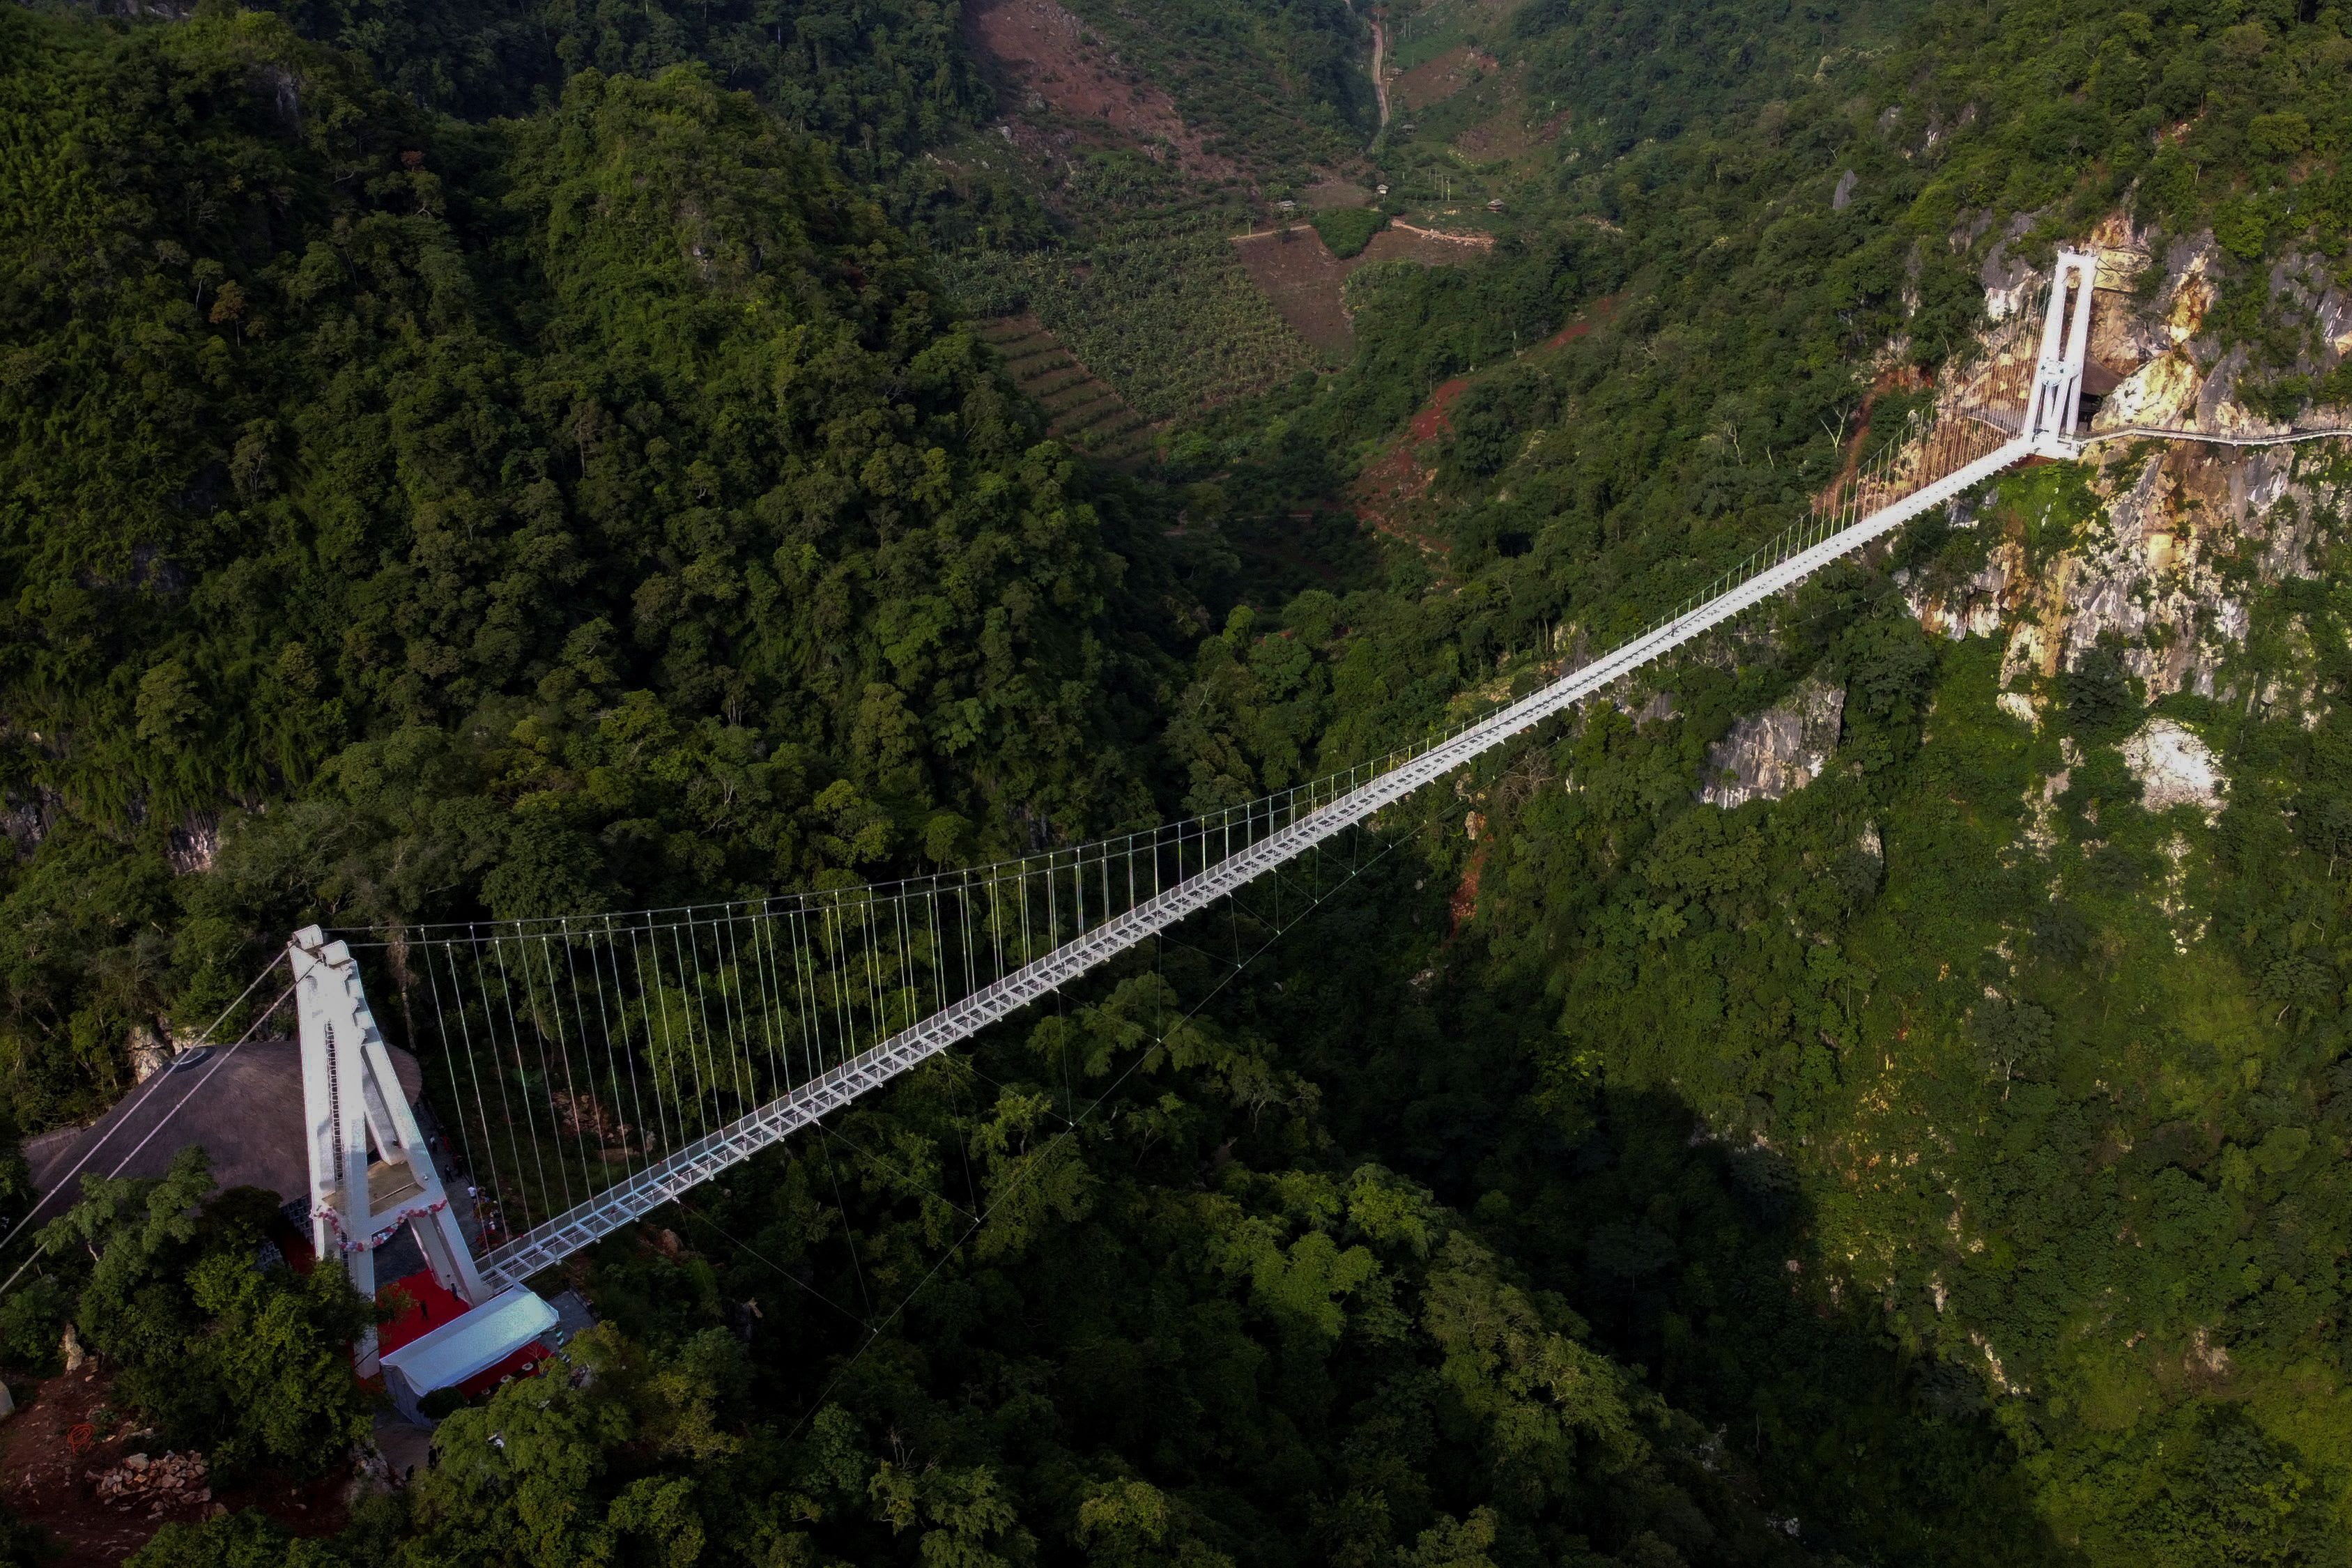 An aerial view of the Bach Long glass bridge at Moc Chau district in Son La province, Vietnam on May 28, 2022. 